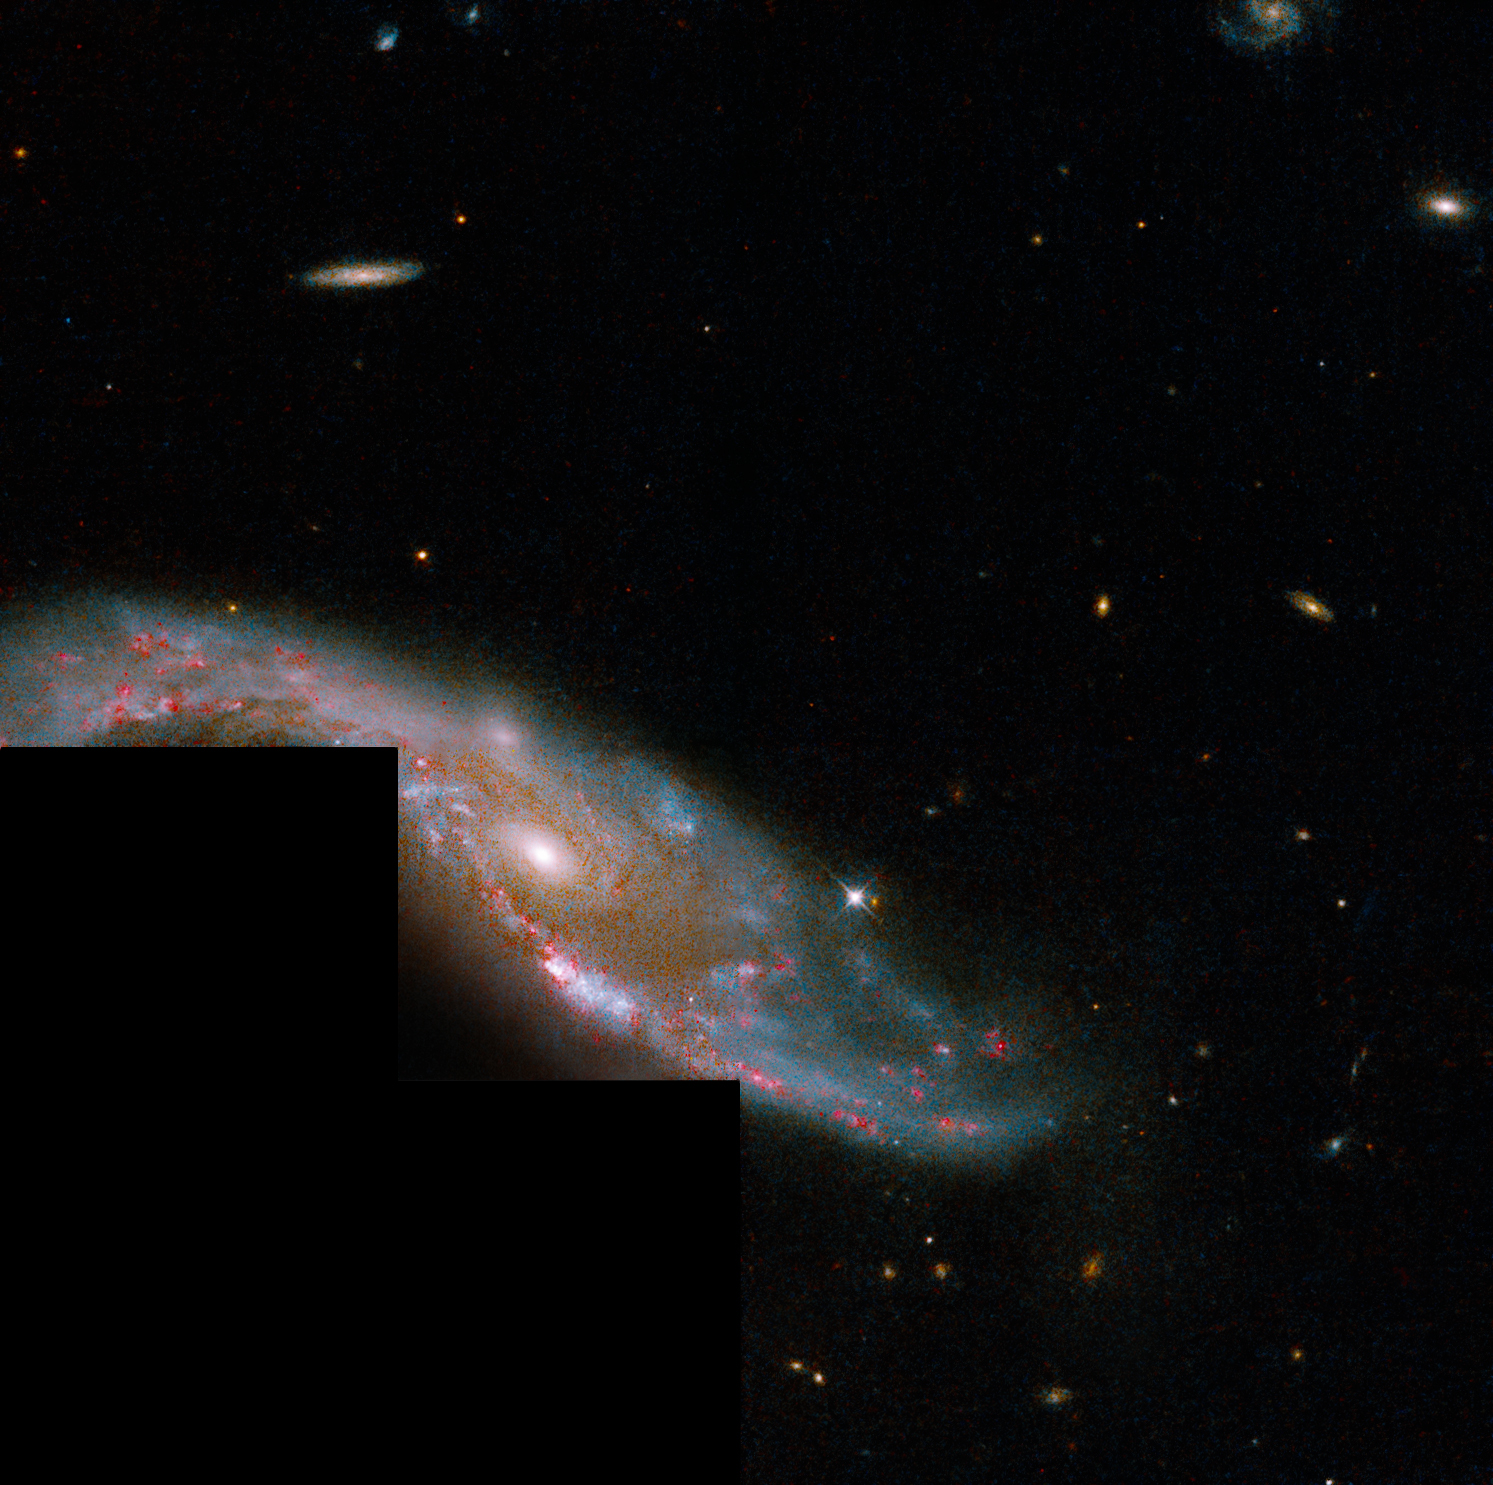 NASA telescope observes a spiral galaxy 350 million light-years away from Earth